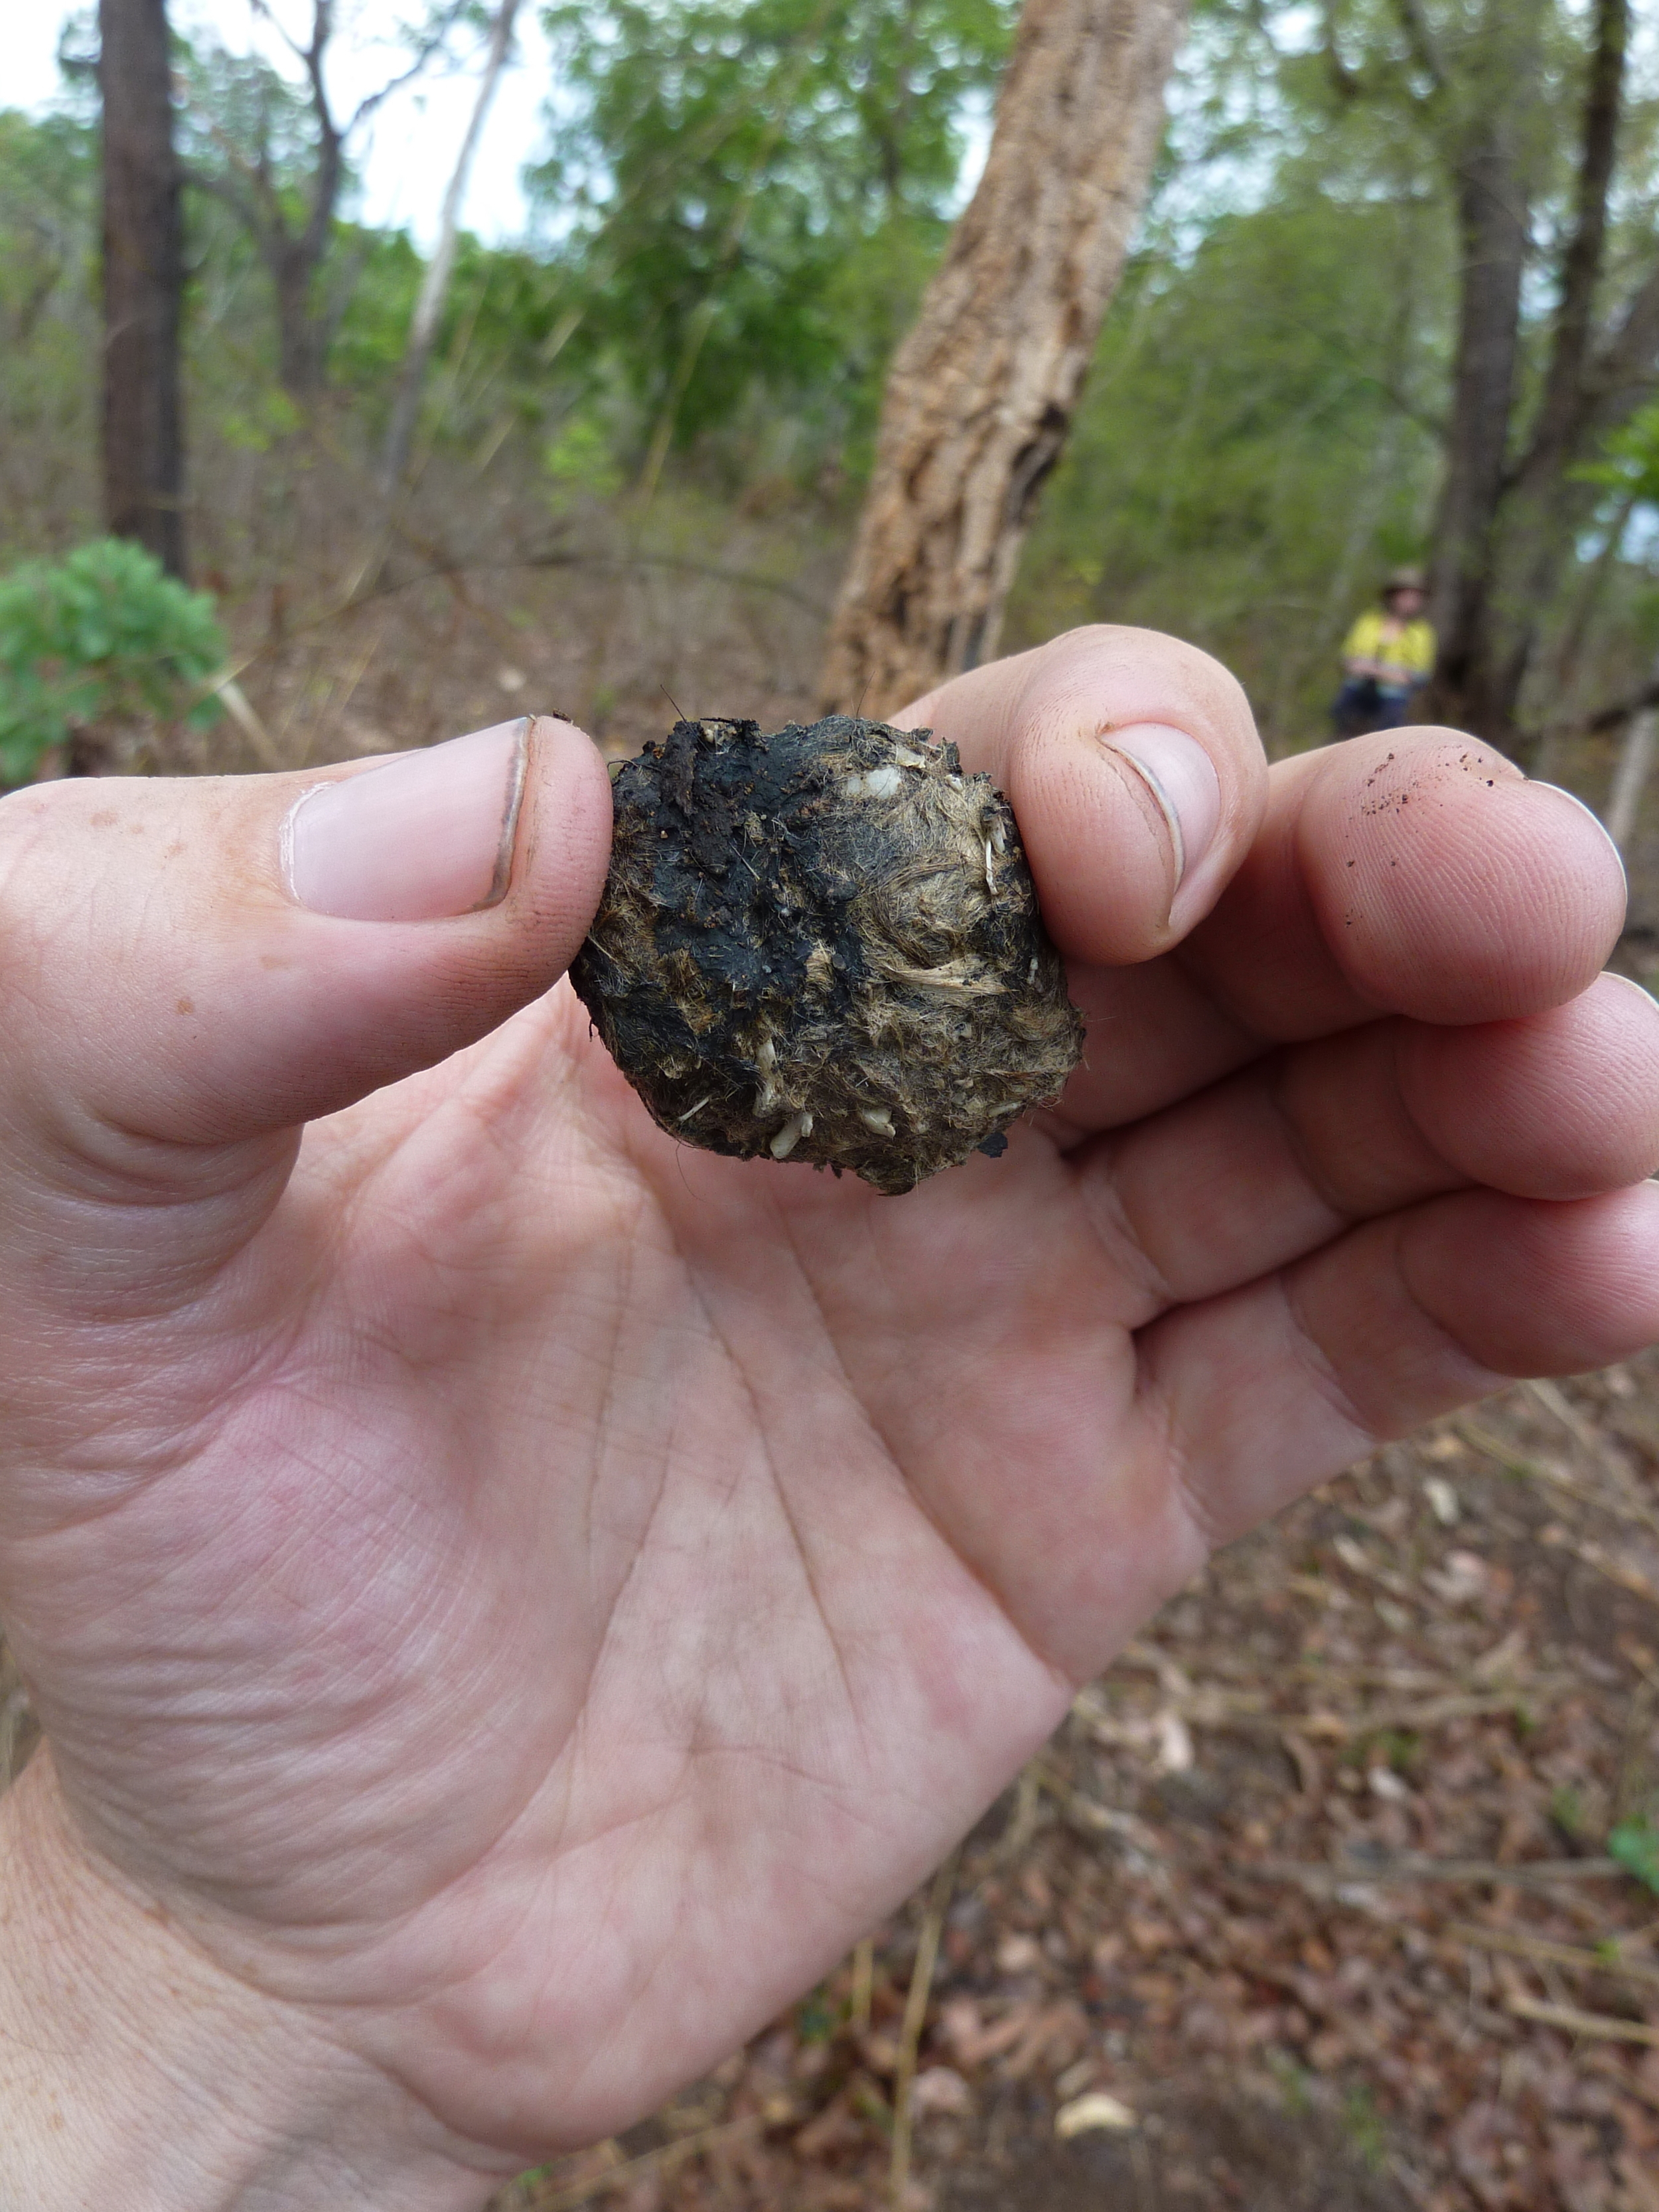 Owl Pellets: what are they and what can they teach us? — The Grip